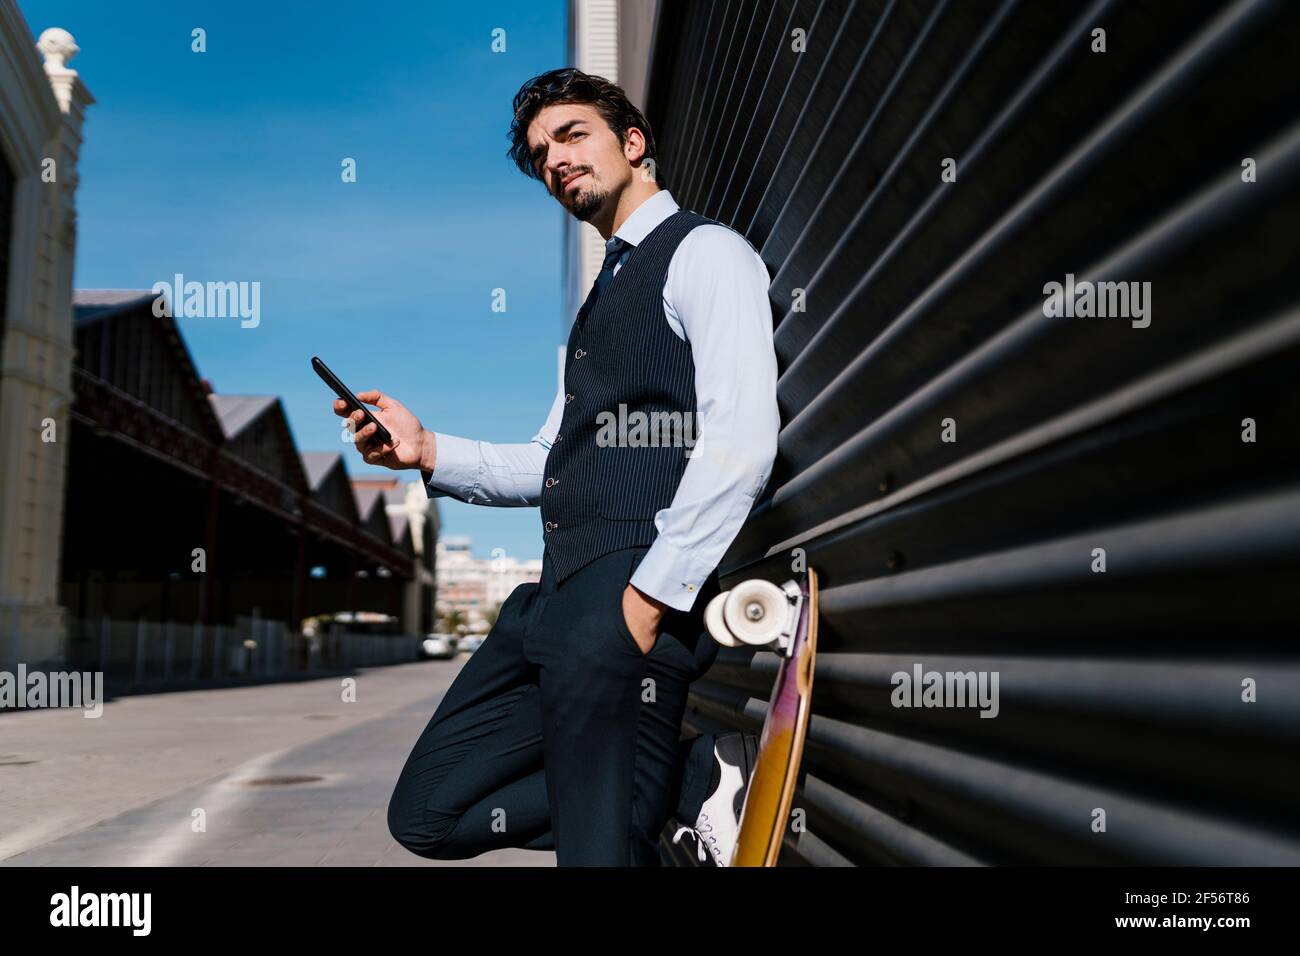 Businessman looking away while holding mobile phone against wall Stock Photo